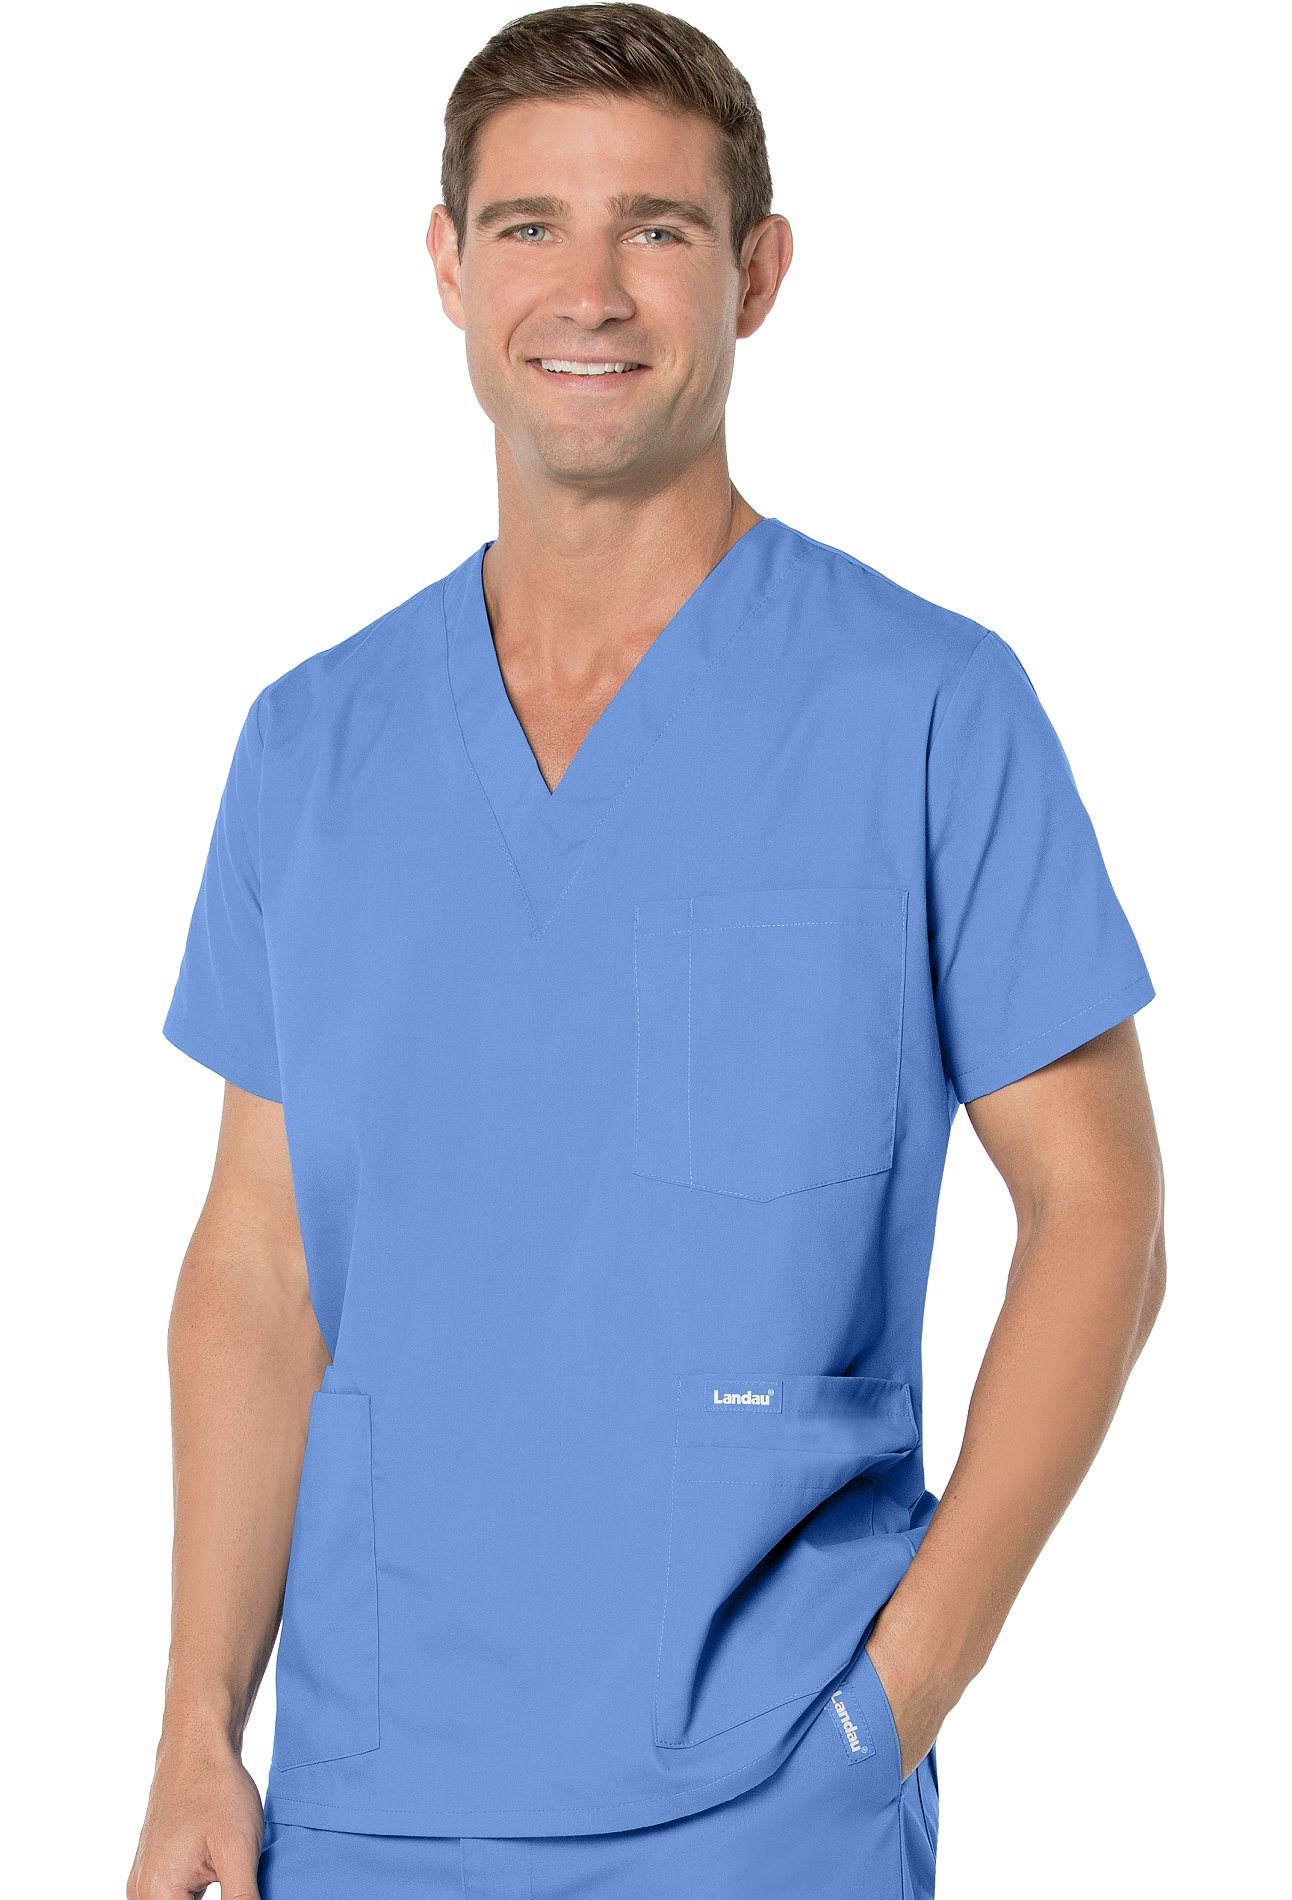 How to Style Scrubs: 5 Tips